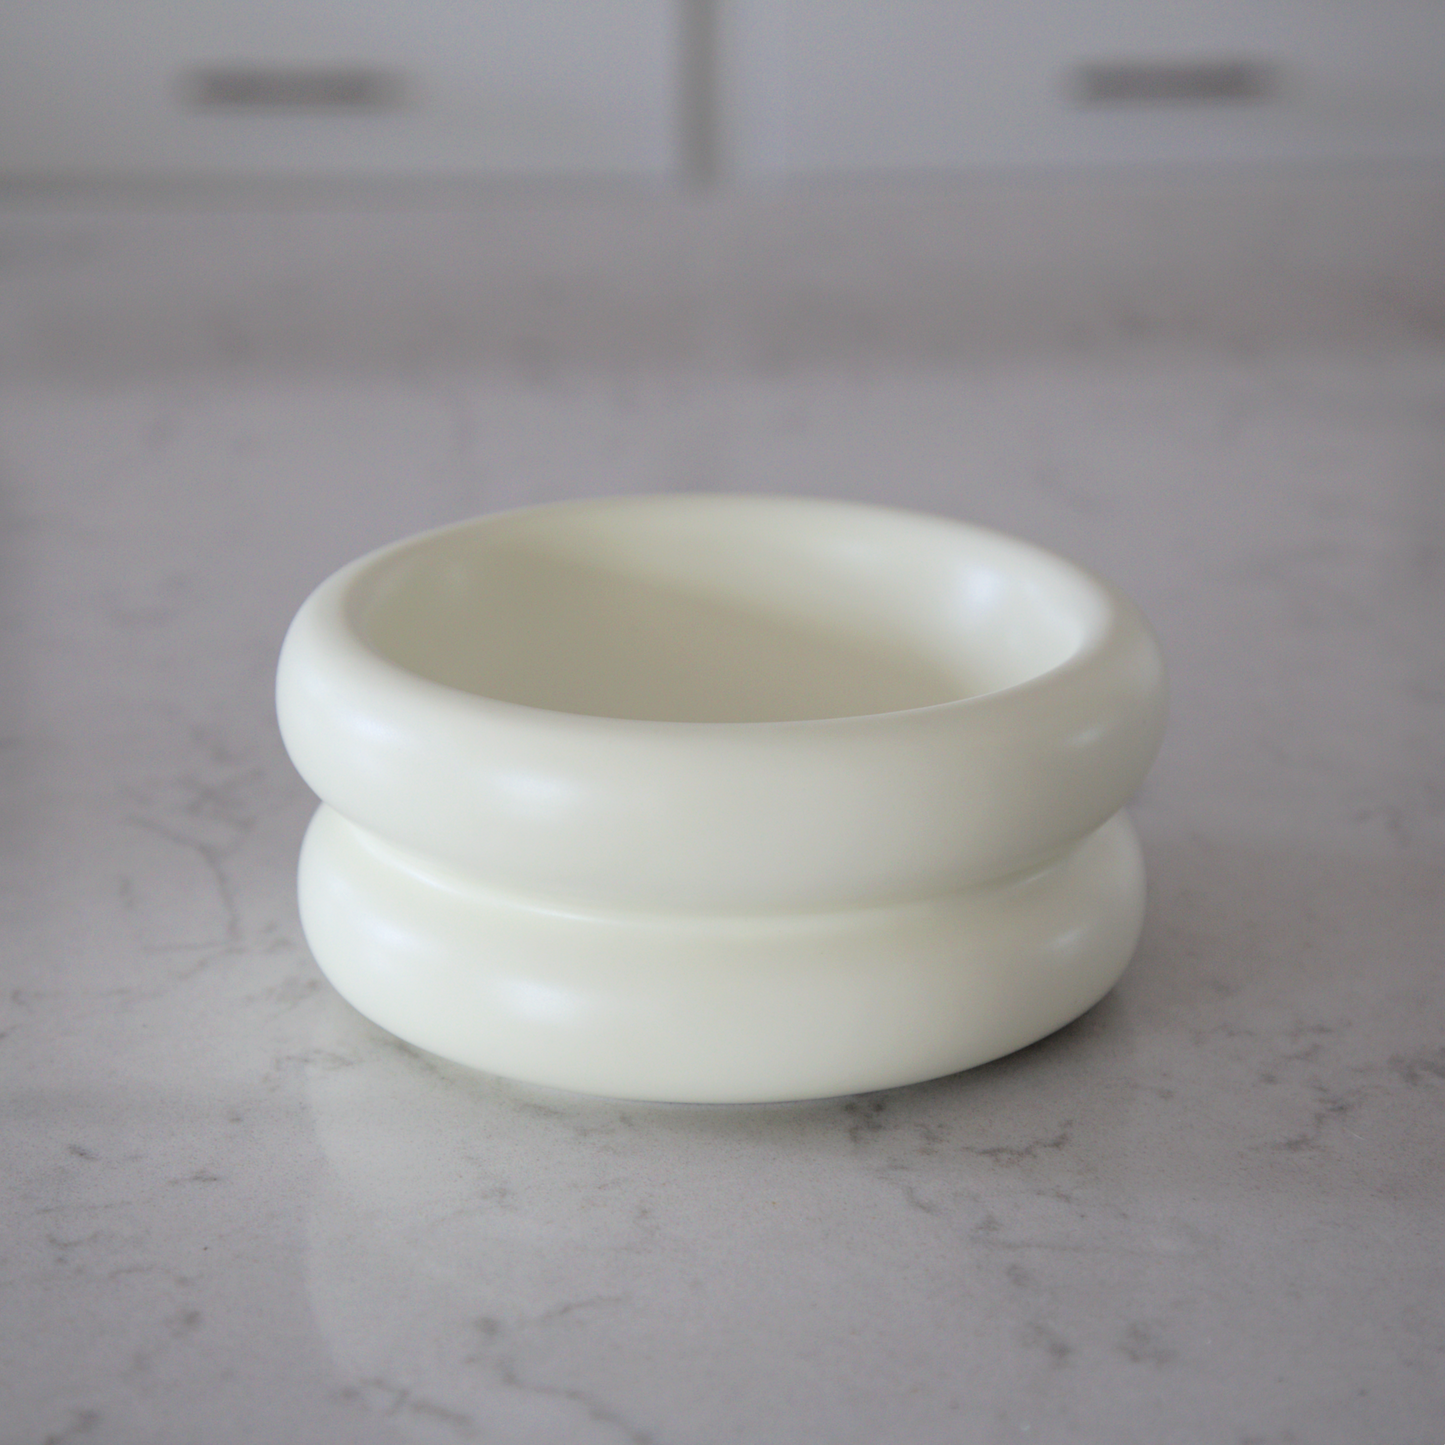 modern stylish elevated cat bowl on marble kitchen counter that prevents whisker fatigue with wide and shallow design